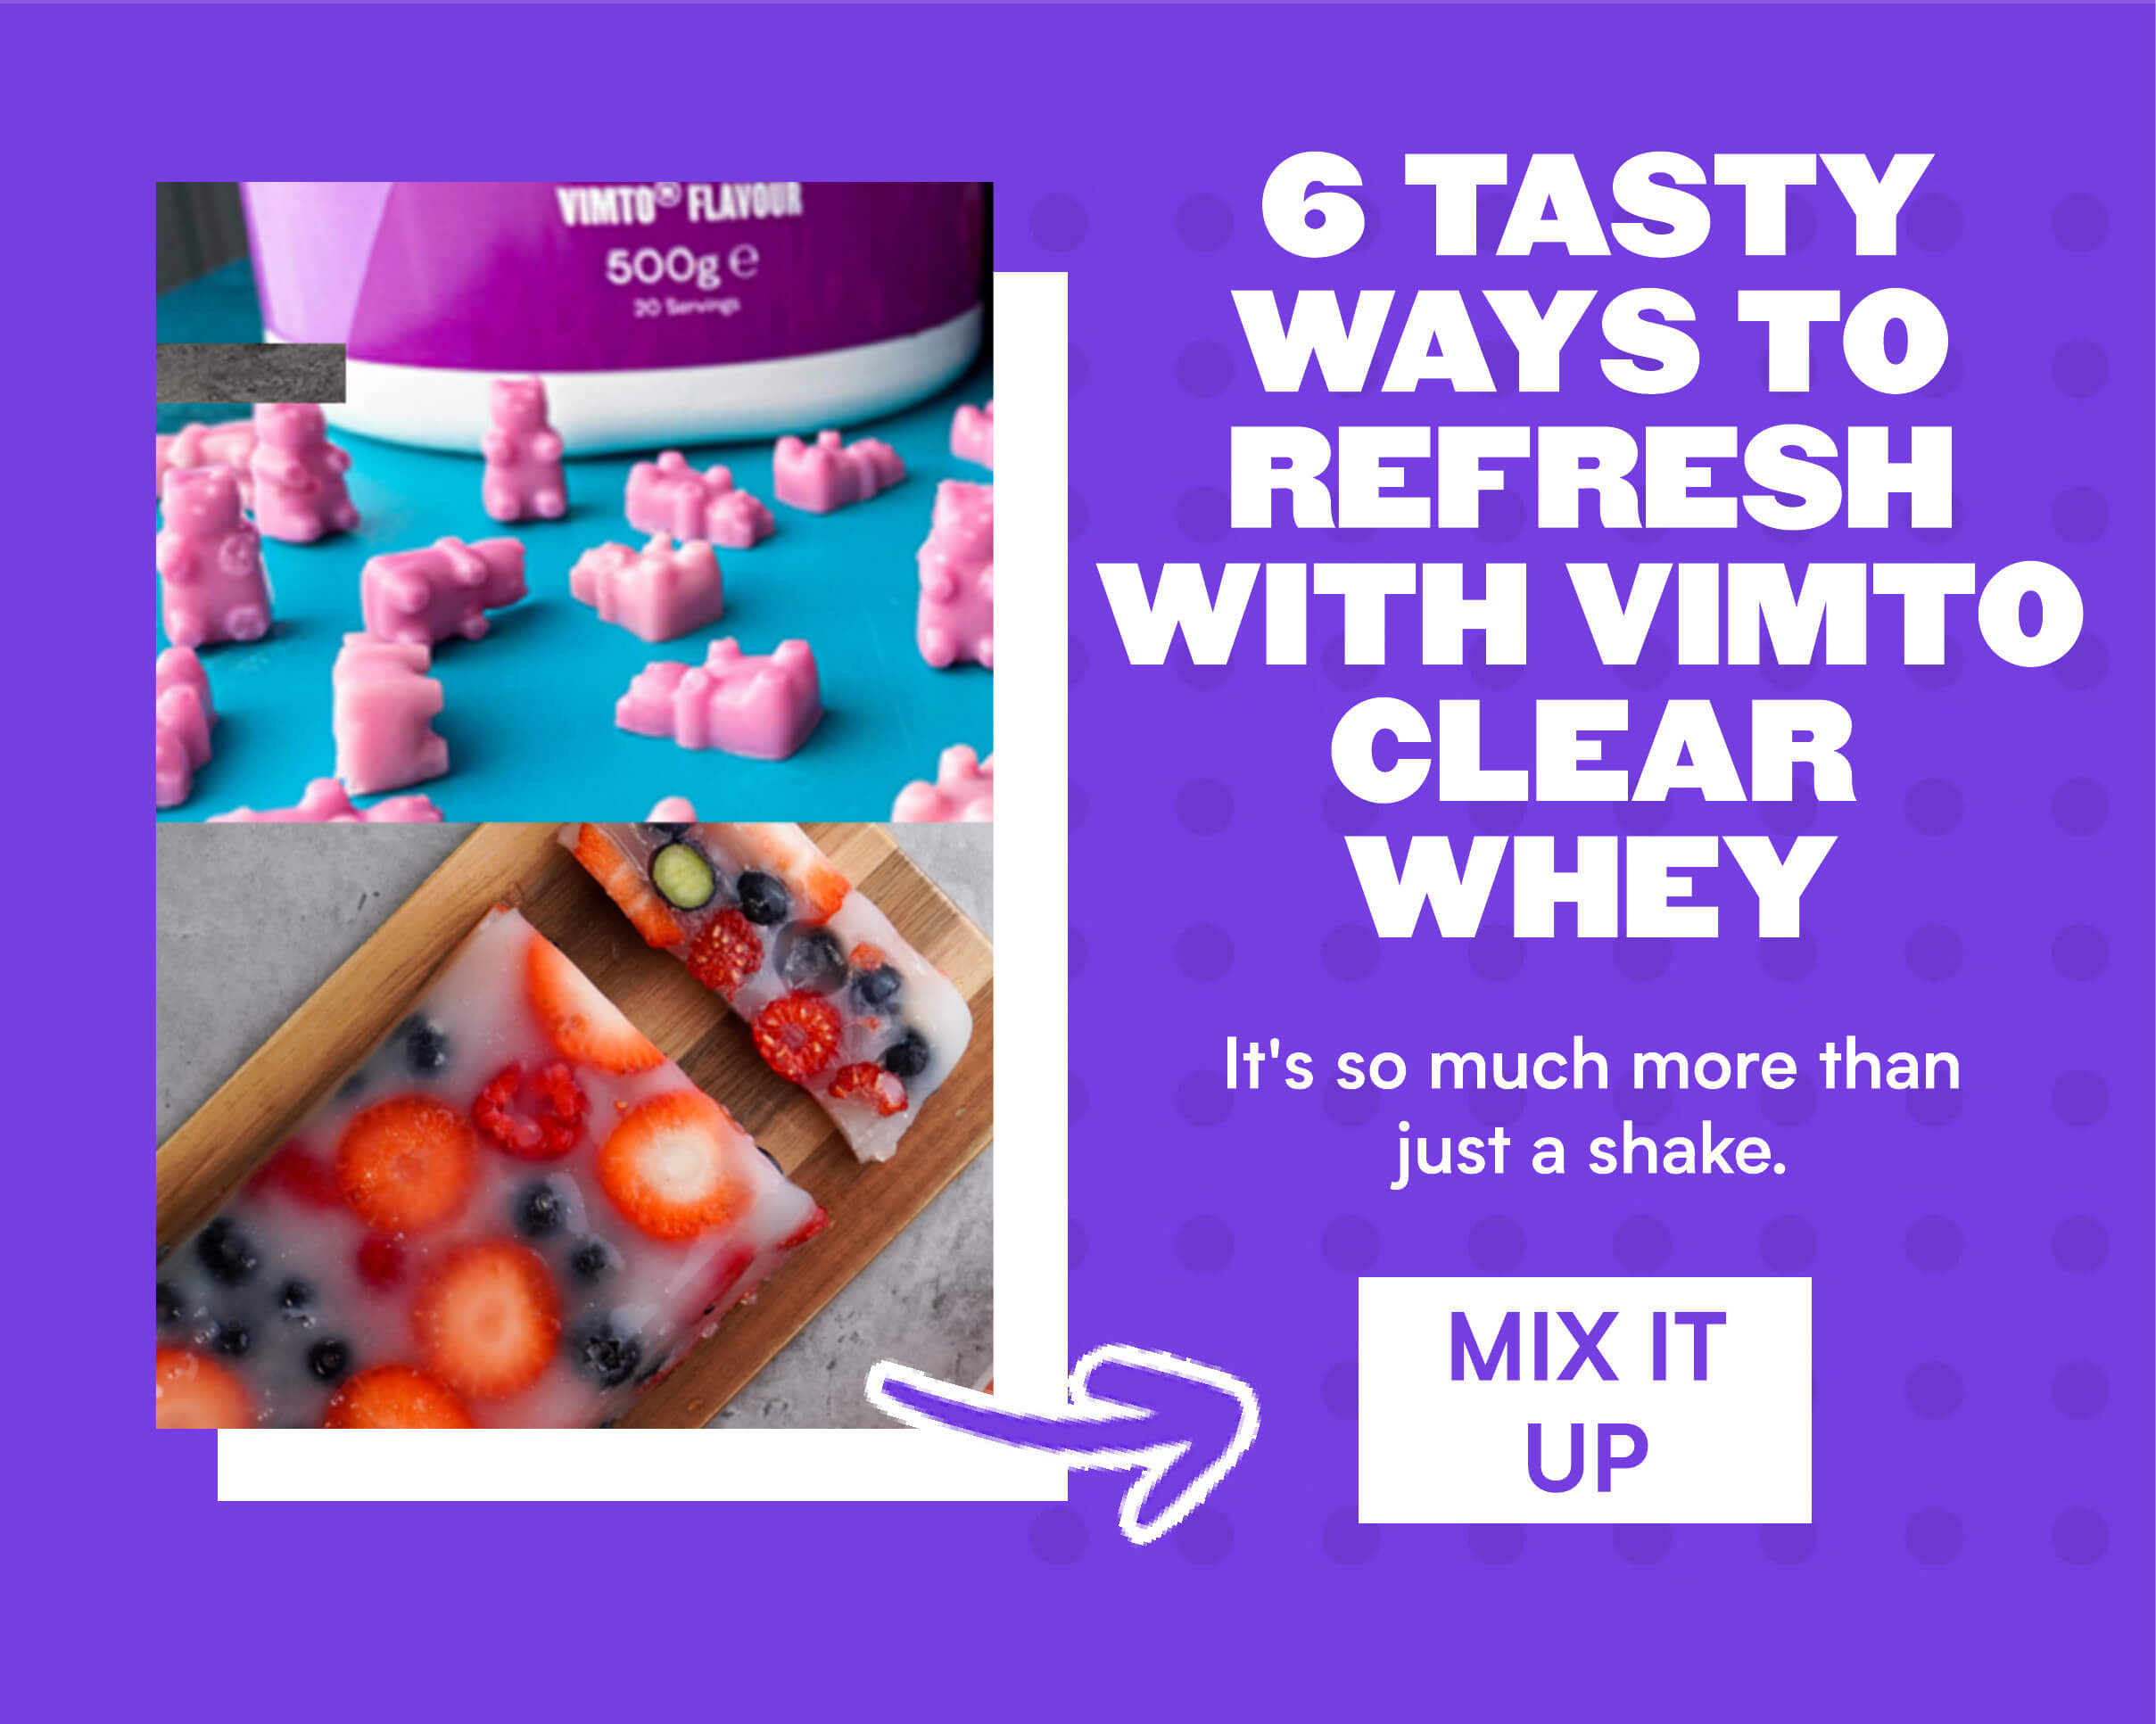 6 TASTY WAYS TO REFRESH WITH VIMTO B .Y WHEY It's so much more than just a shake. MIXIT UP 